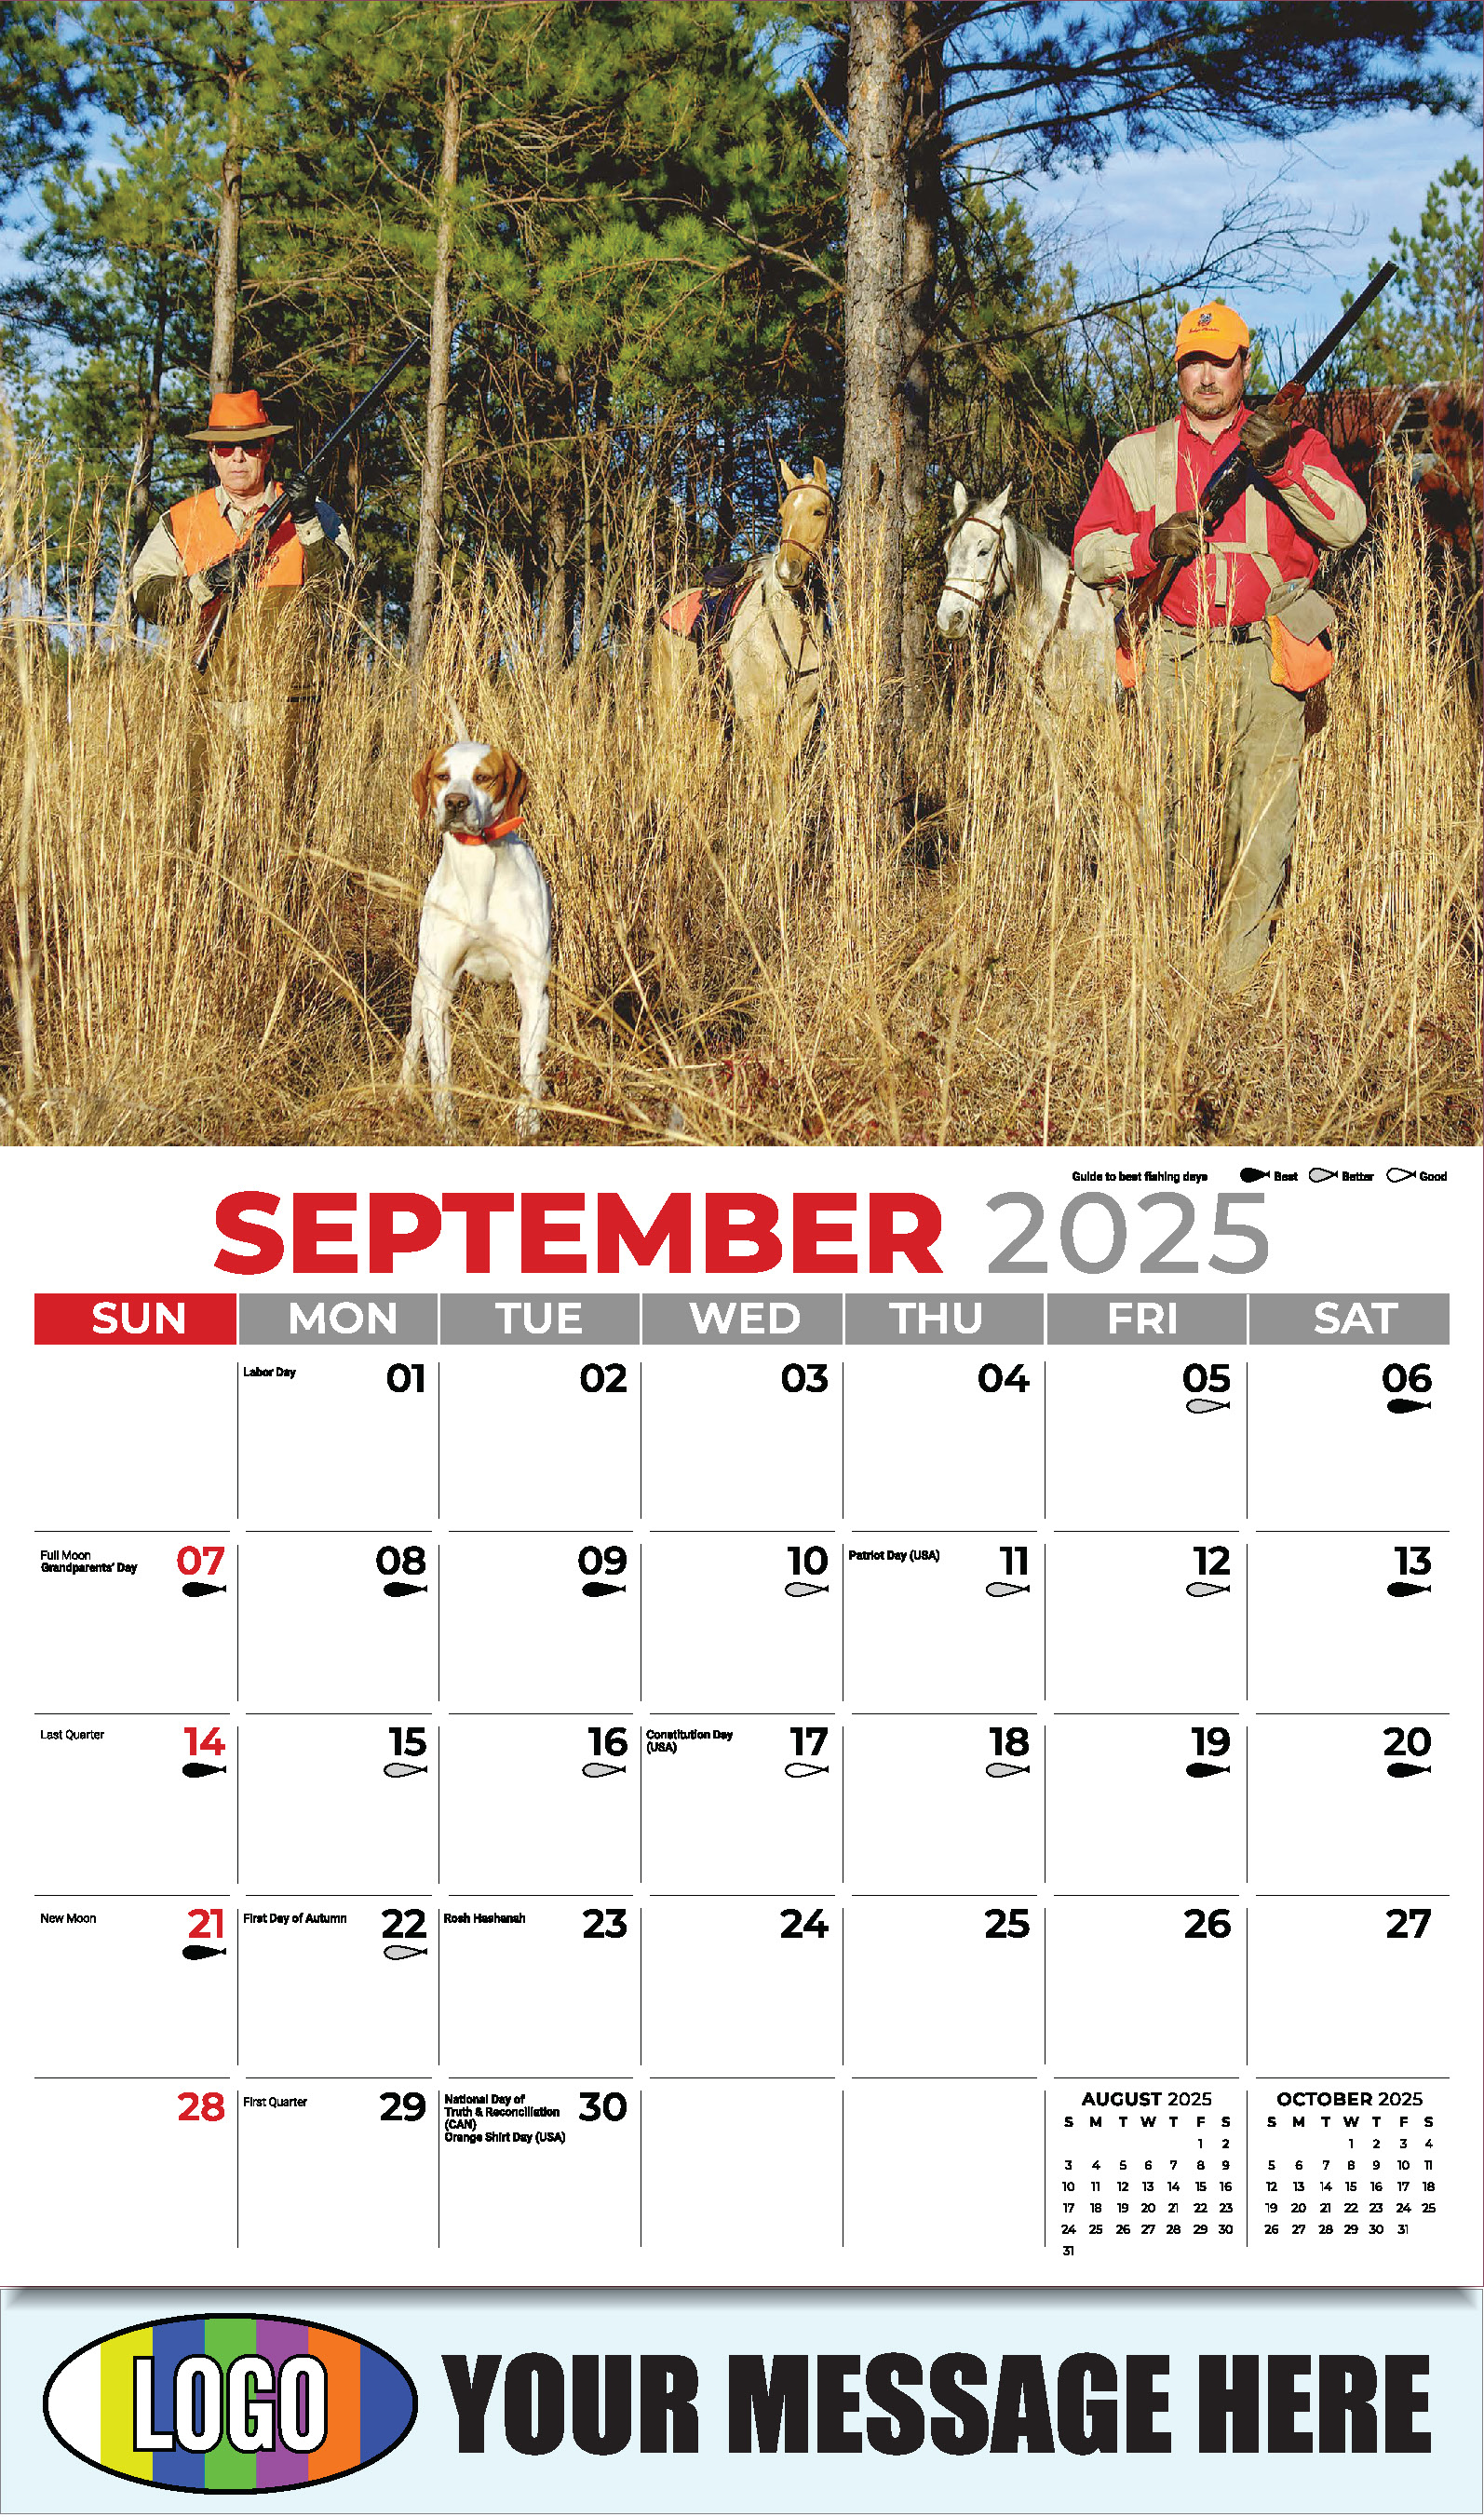 Fishing and Hunting 2025 Business Promotion Calendar - September